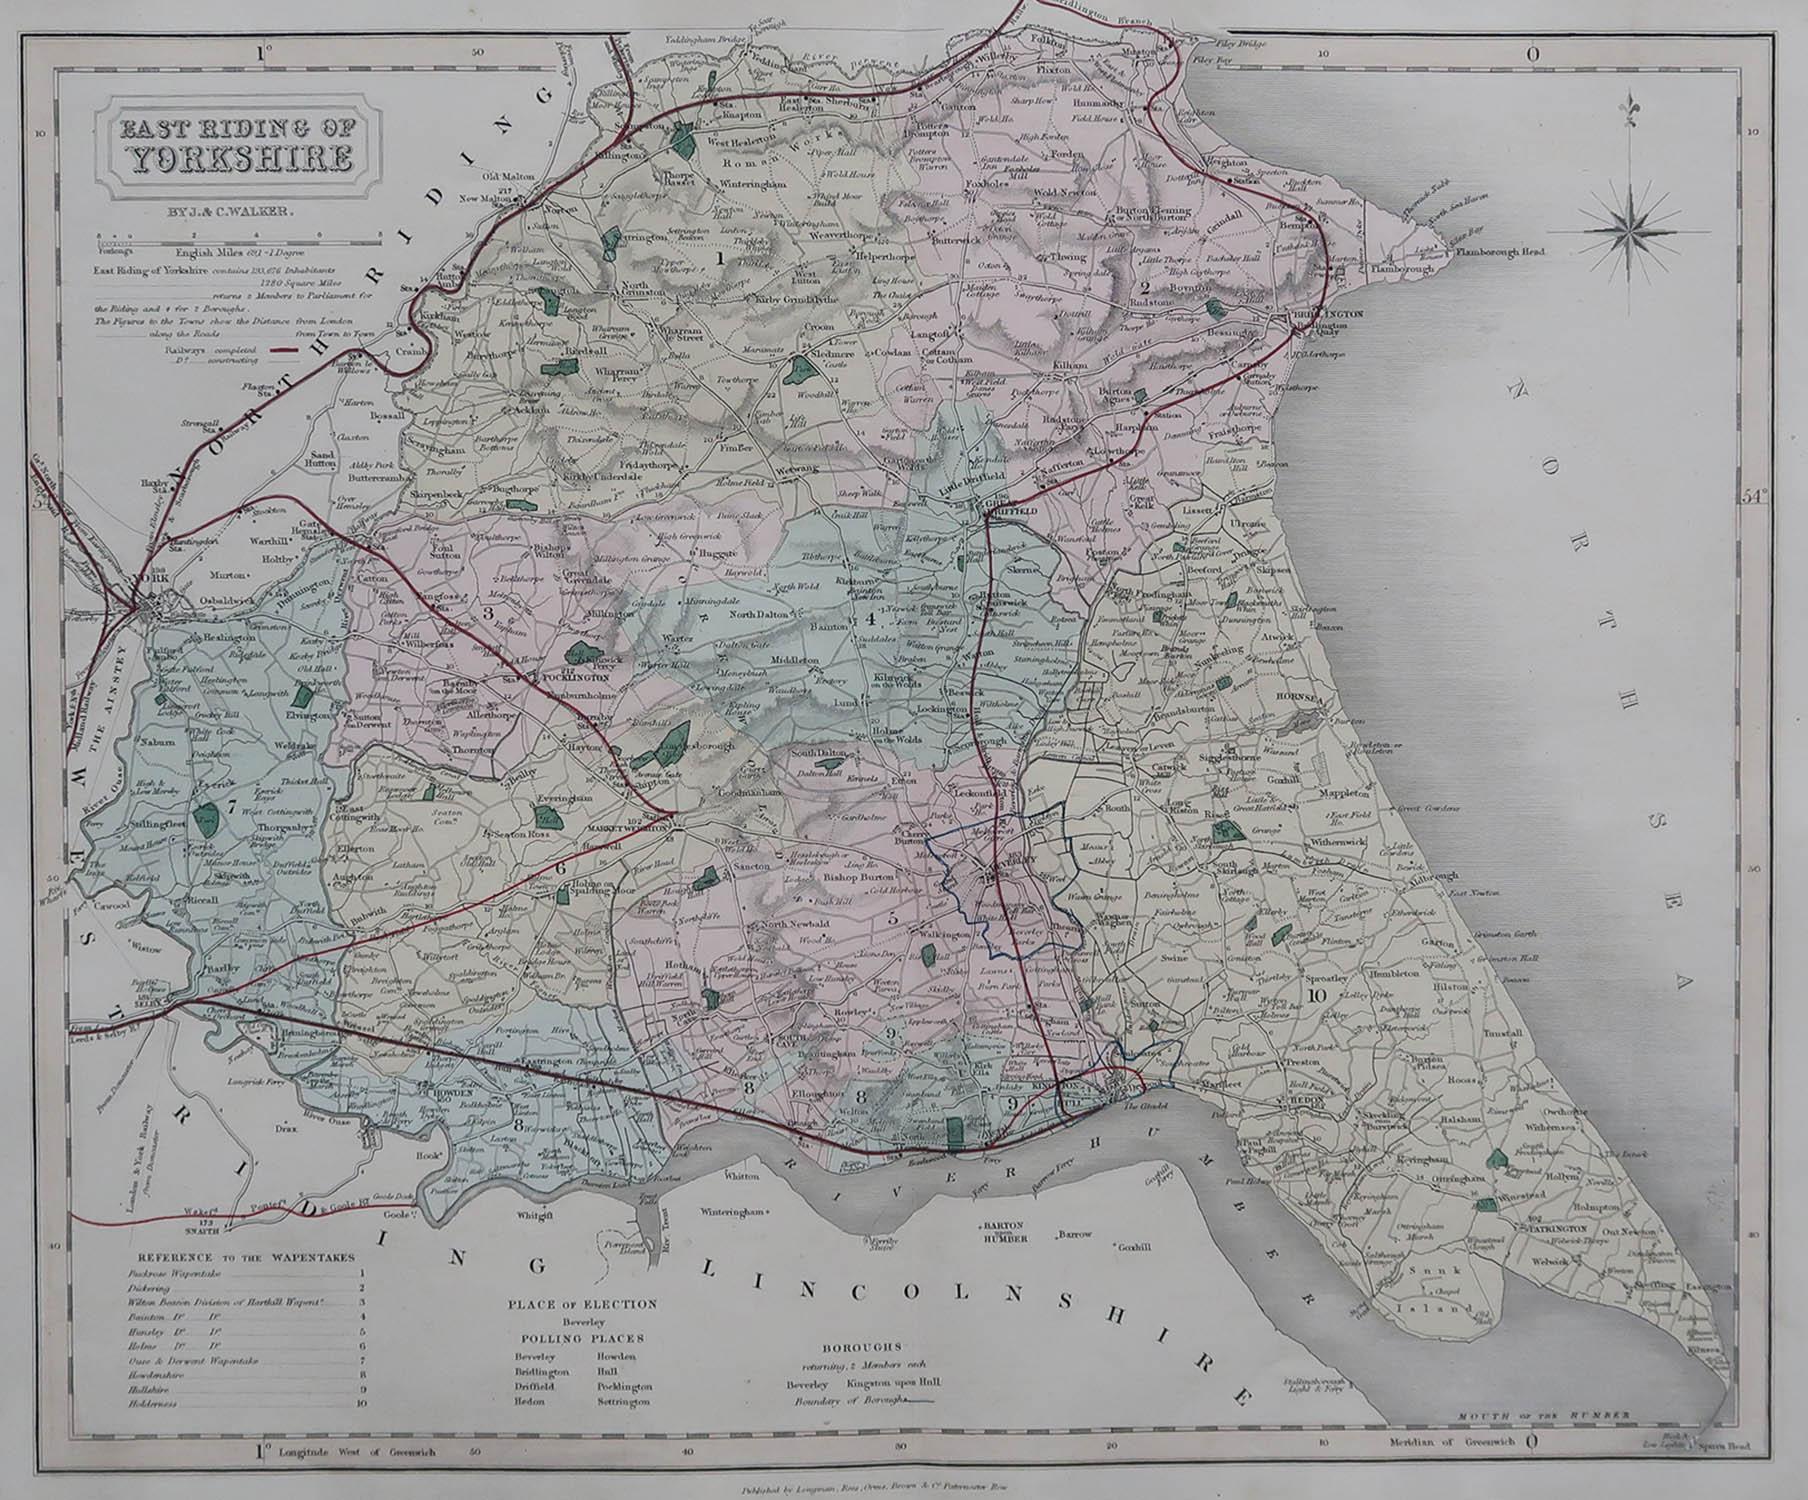 Great map of The East Riding of Yorkshire

Original colour

By J & C Walker

Published by Longman, Rees, Orme, Brown & Co. 1851

Unframed.




